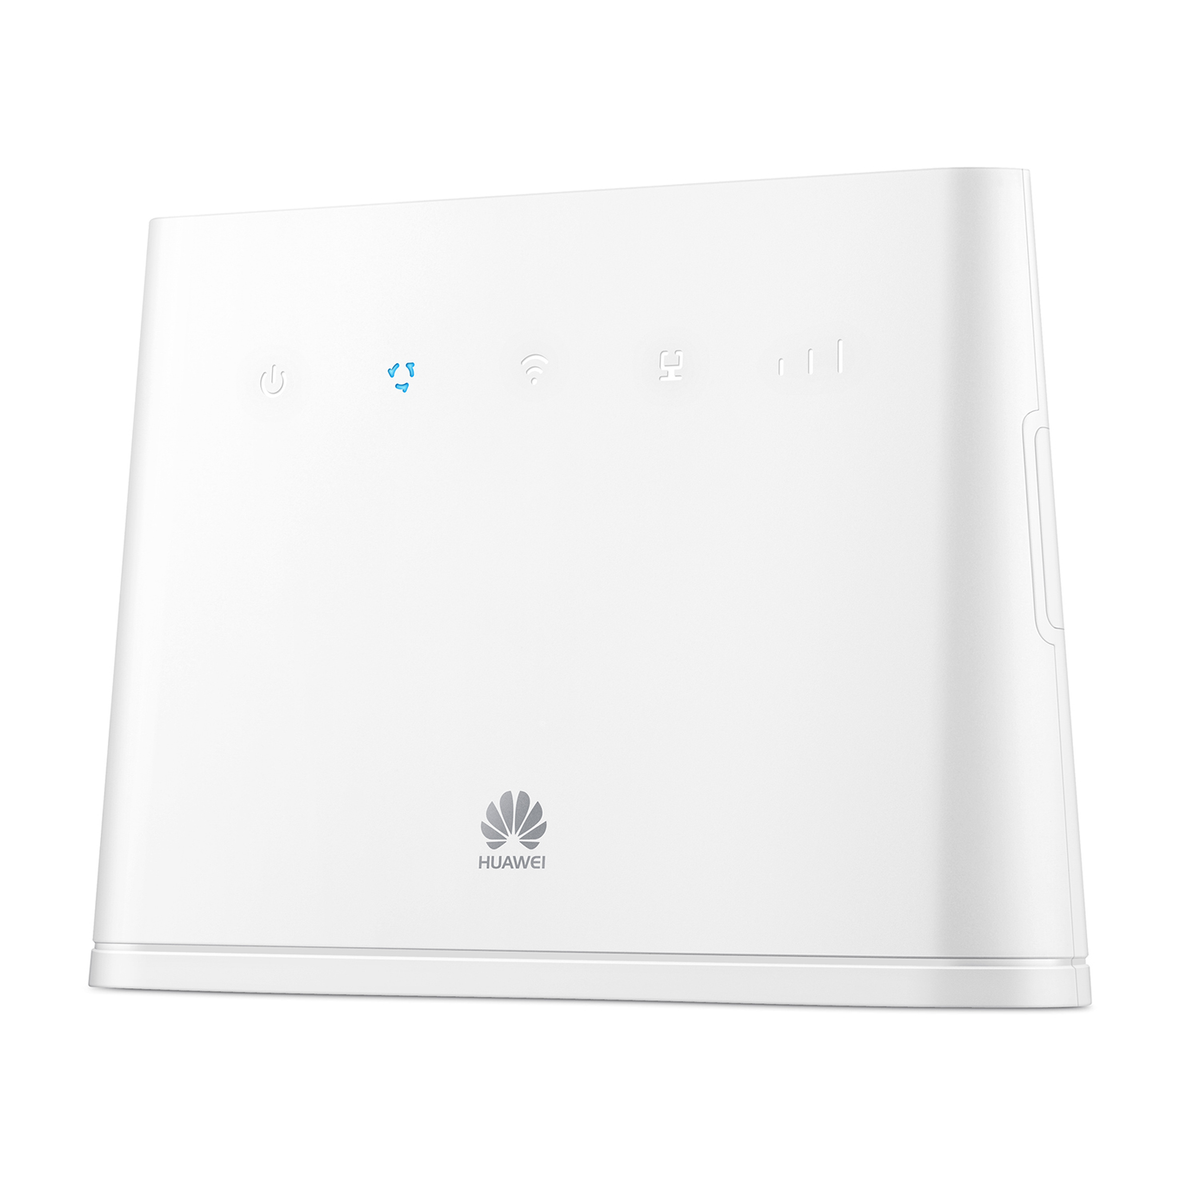 HUAWEI B311S-221 STAT WHITE 4G 150MBPS ROUTER LTE DL Mbit/s CAT4 Router 150